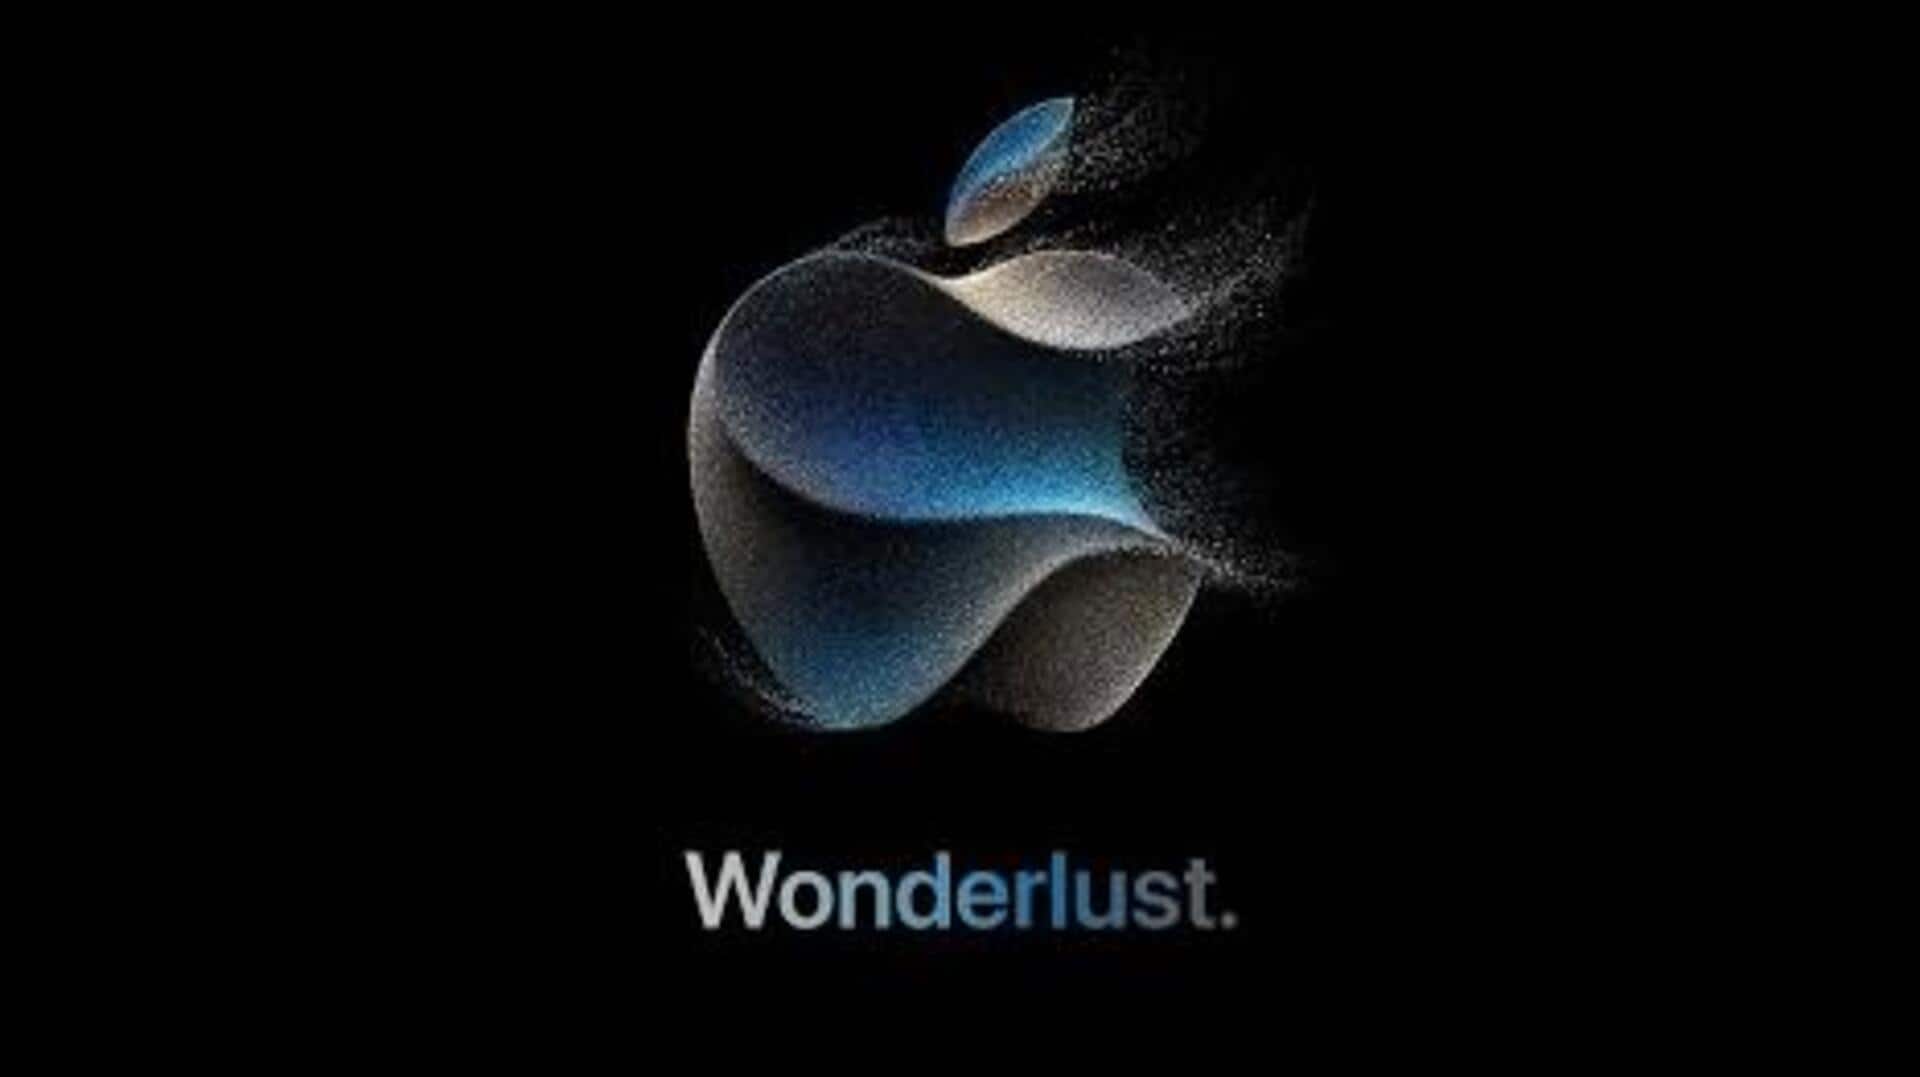 Apple 'Wonderlust' iPhone launch event today: Timings, how to watch